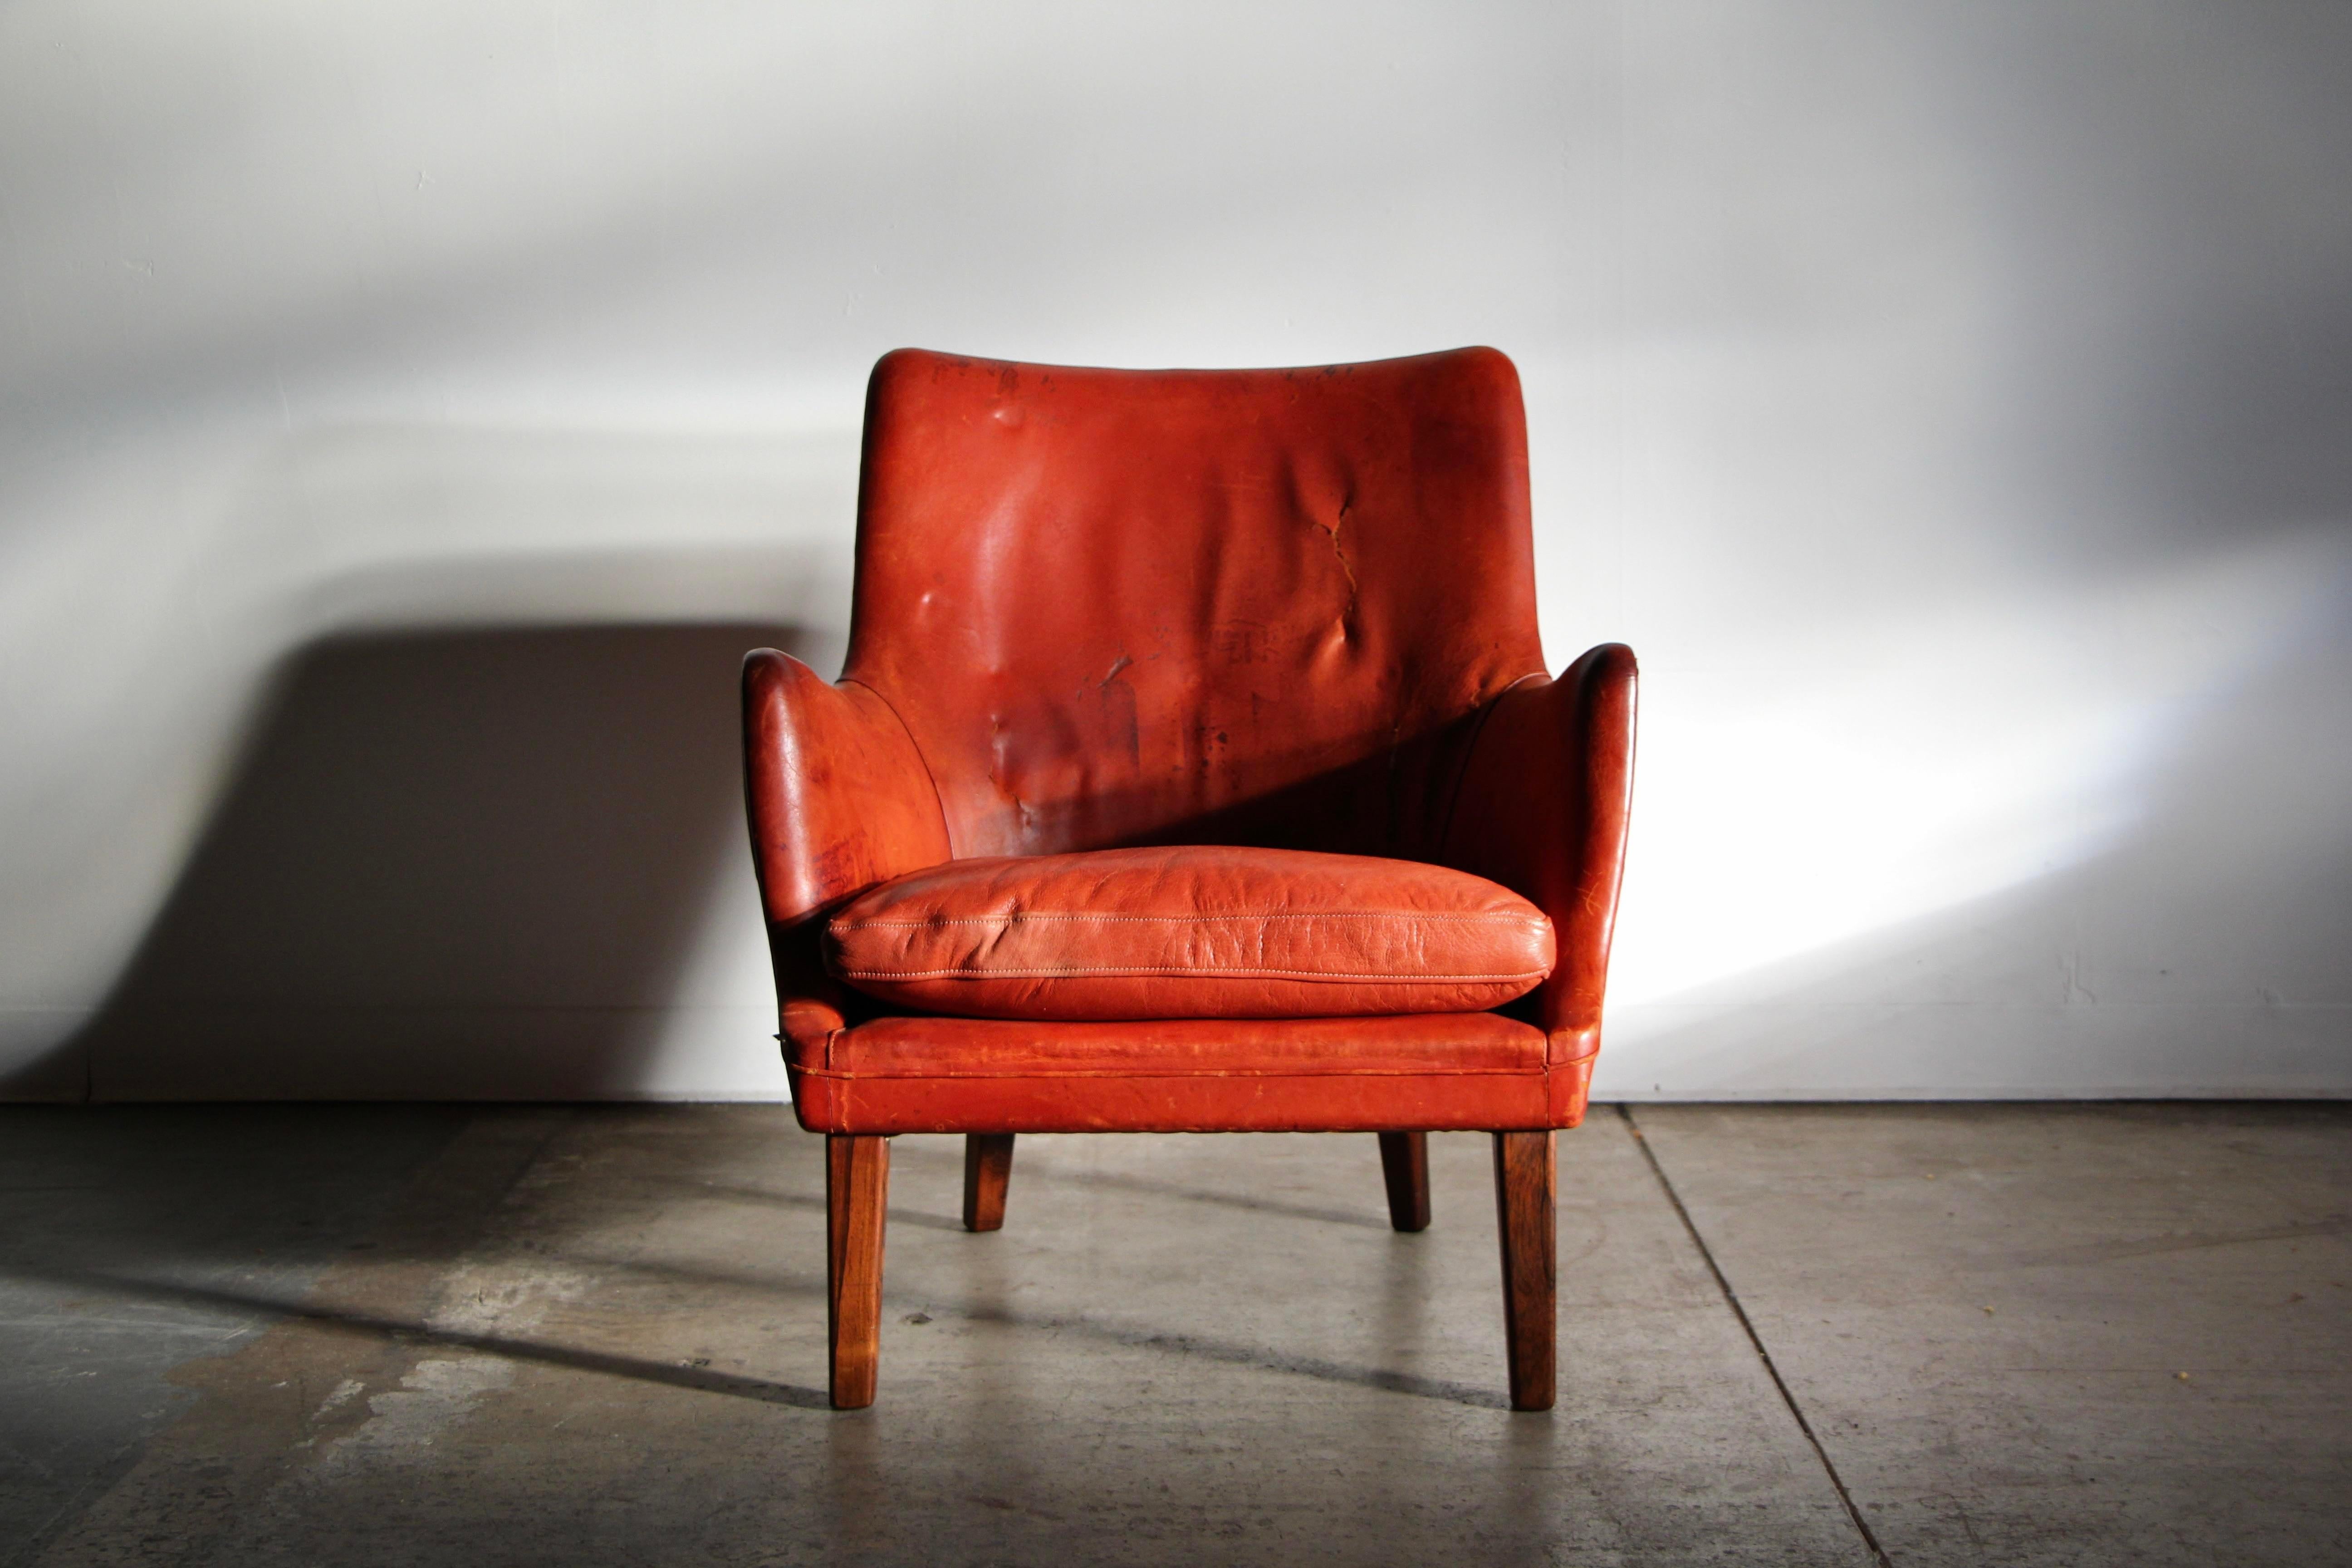 A beautifully proportioned lounge chair by Arne Vodder, manufactured by Ivan Schlechter in the early 1950s. This example sports its original distressed, fiery cognac leather and has lots of character. Some tears to the back don't hinder its use or